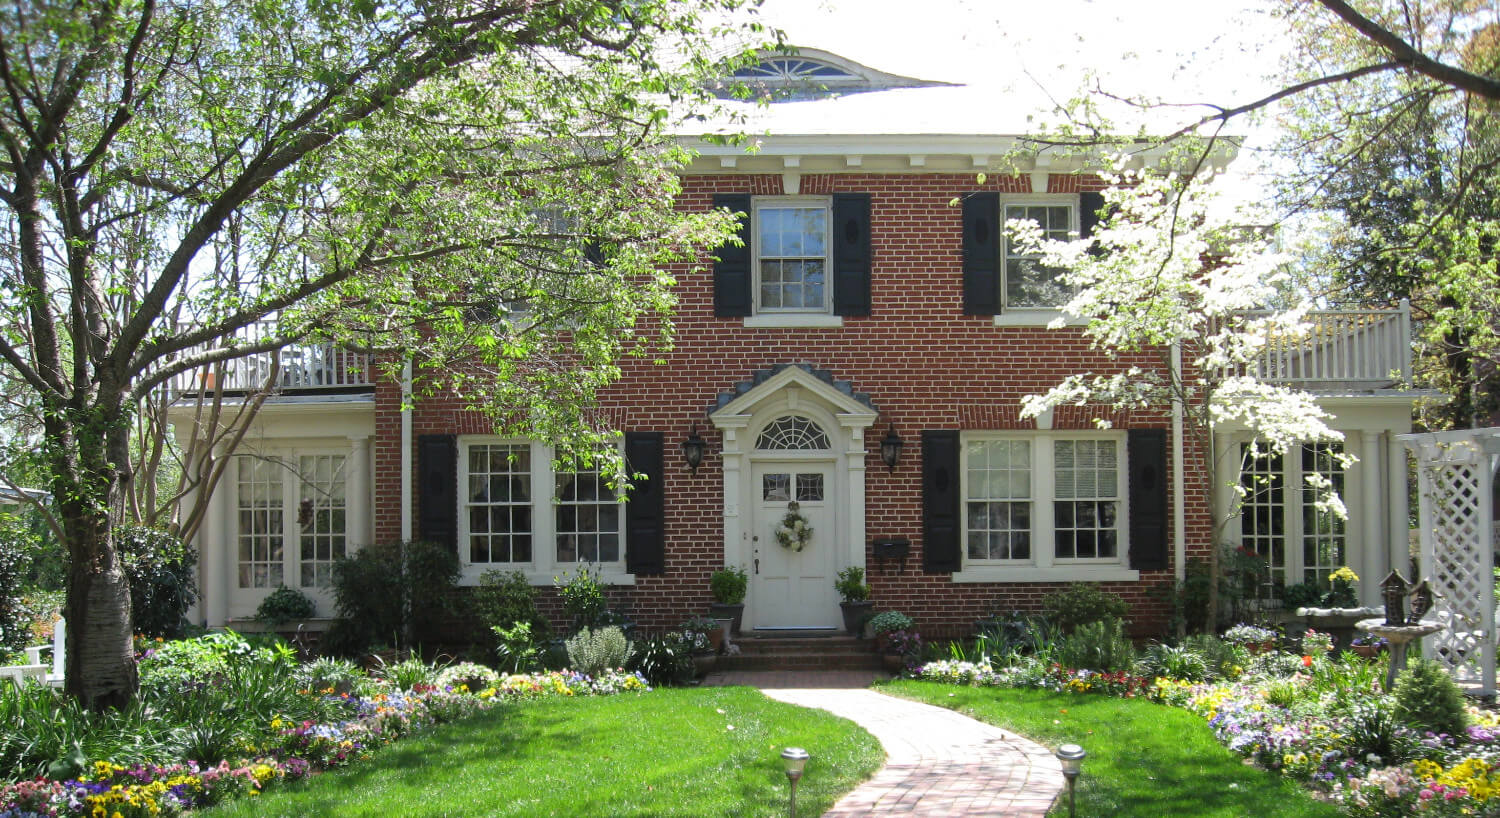 Large brick Colonial-style house fronted by flowering trees and green lawn. 